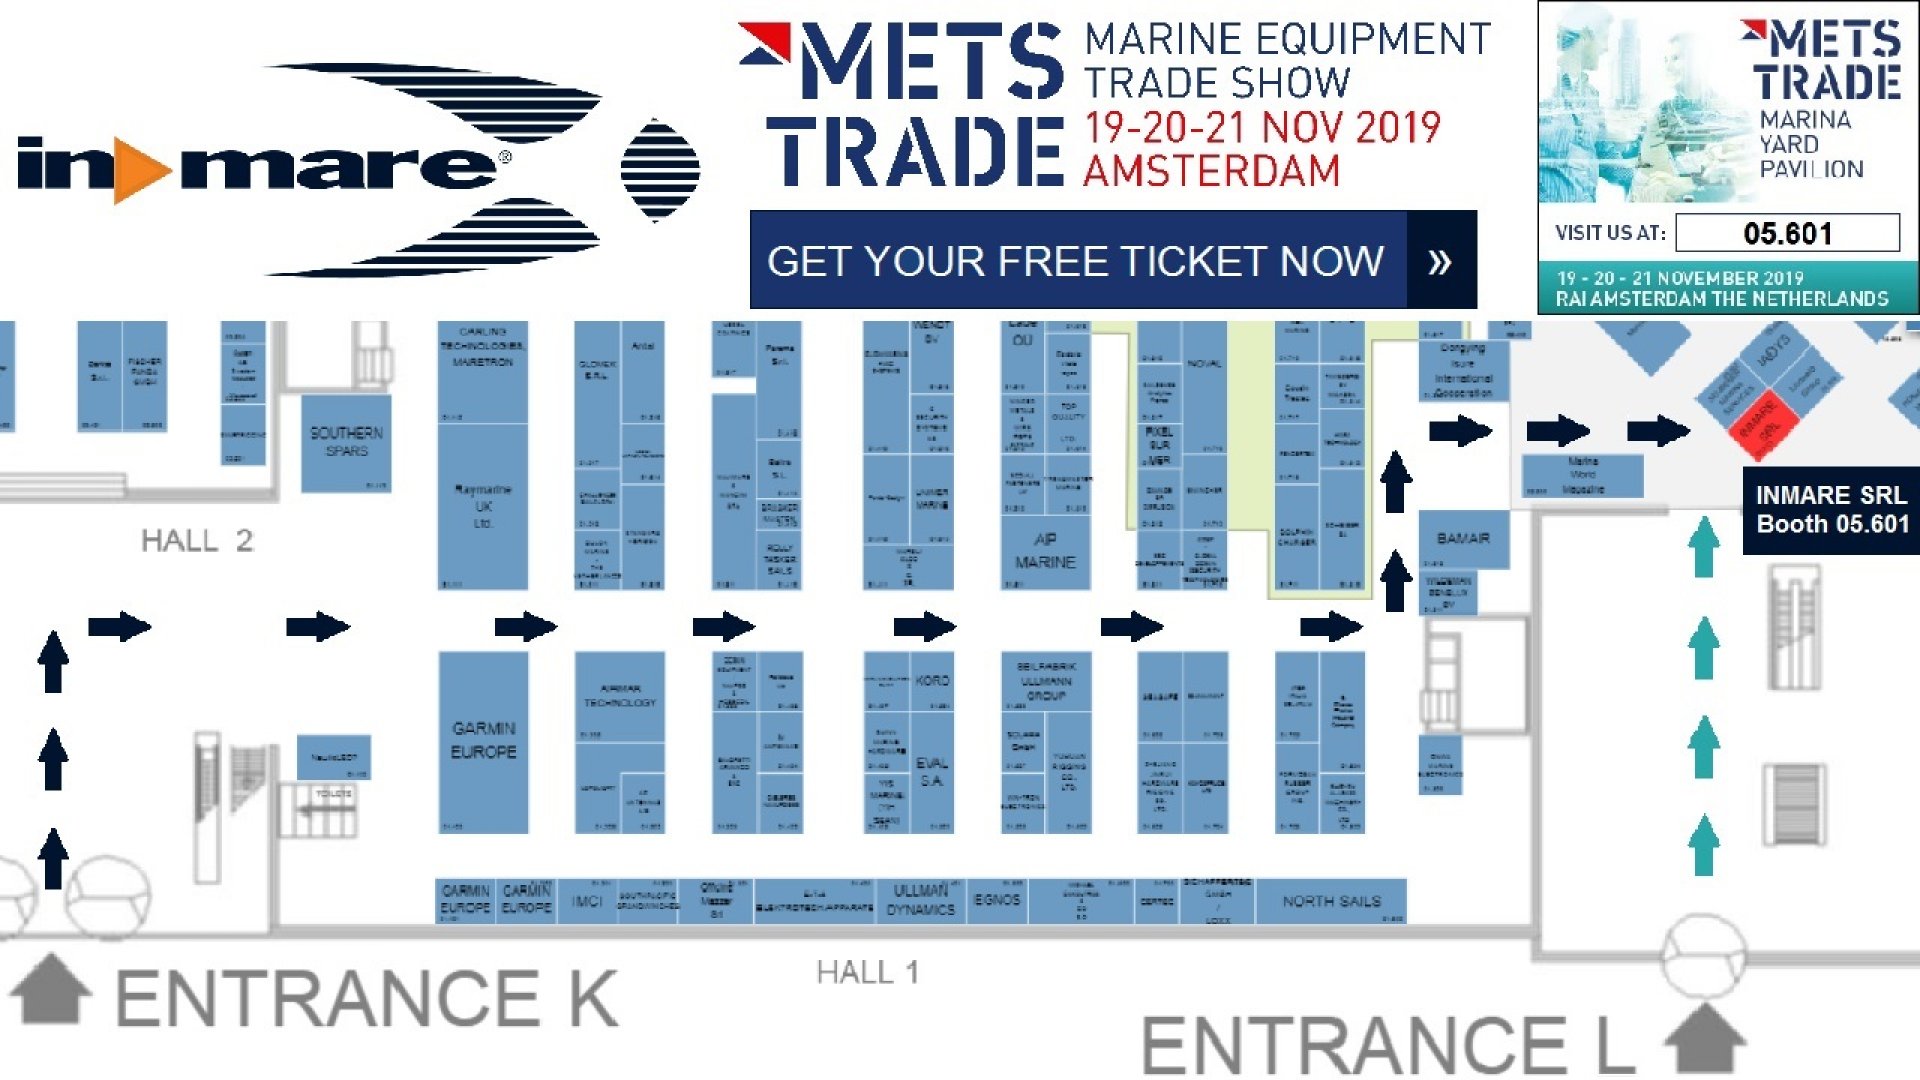 InMare invitation to METSTRADE 2019. Get your free ticket Now!